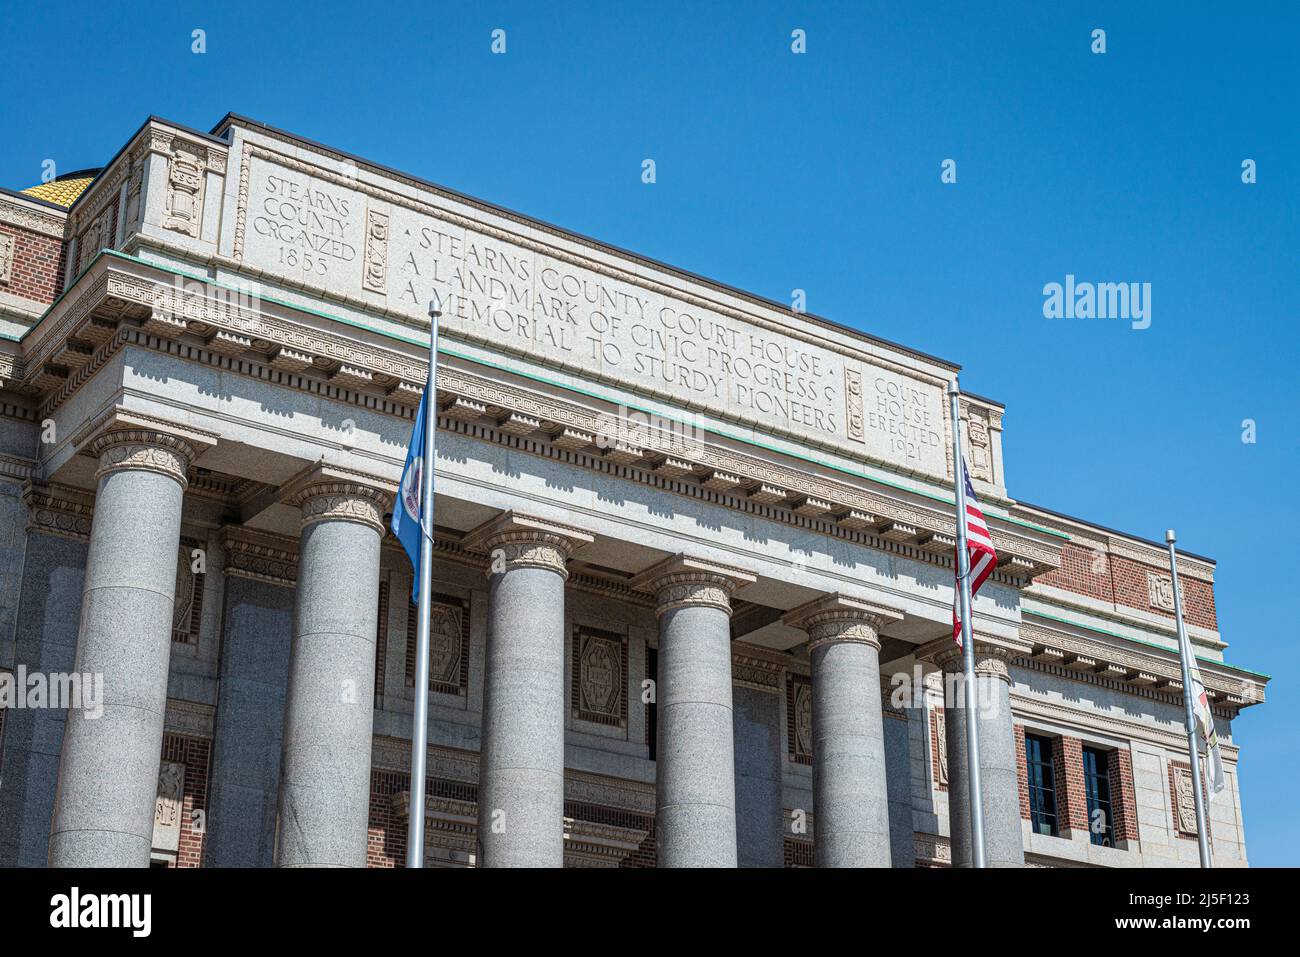 SAINT CLOUD, MINNESOTA - February 19, 2022: the Stearns County Courthouse, located at 725 Courthouse Square, is photographed. Stock Photo